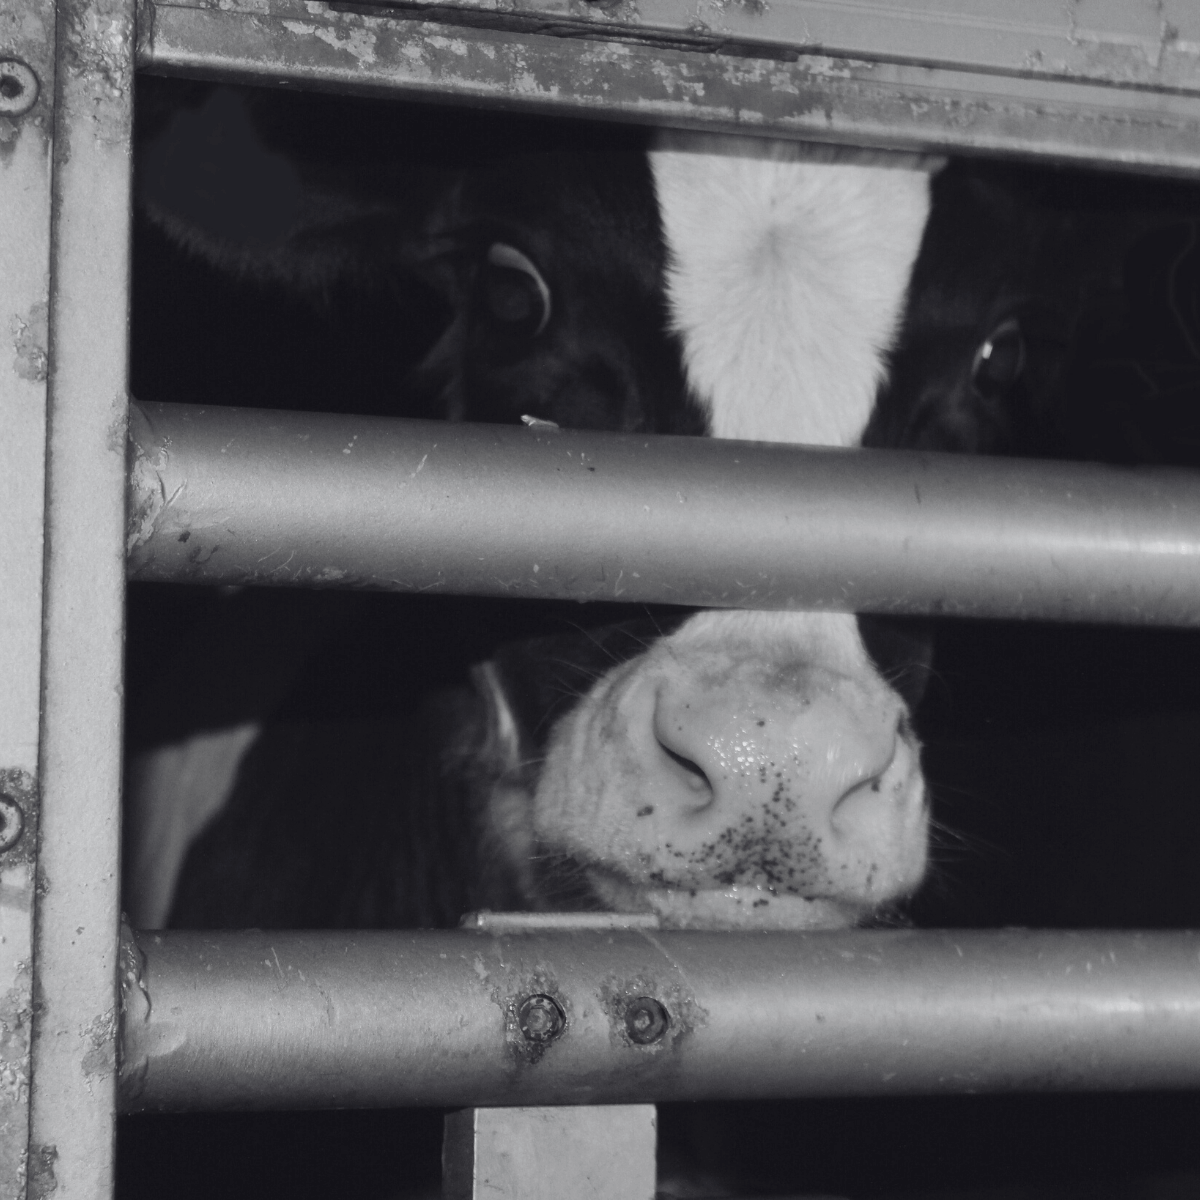 Frightened cow in transport